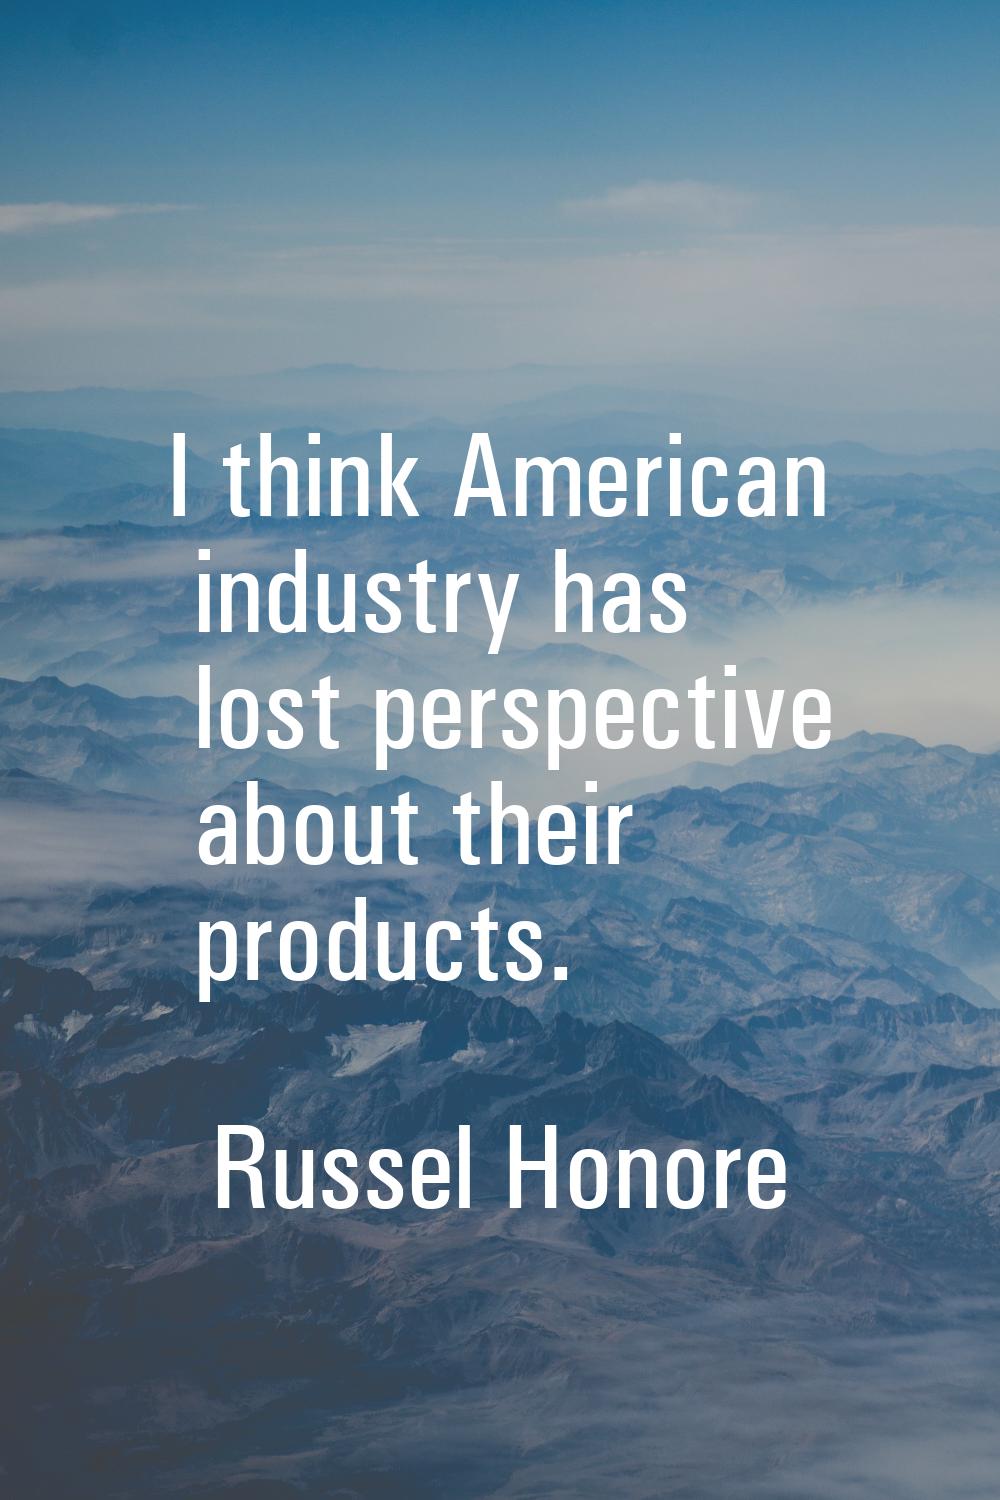 I think American industry has lost perspective about their products.